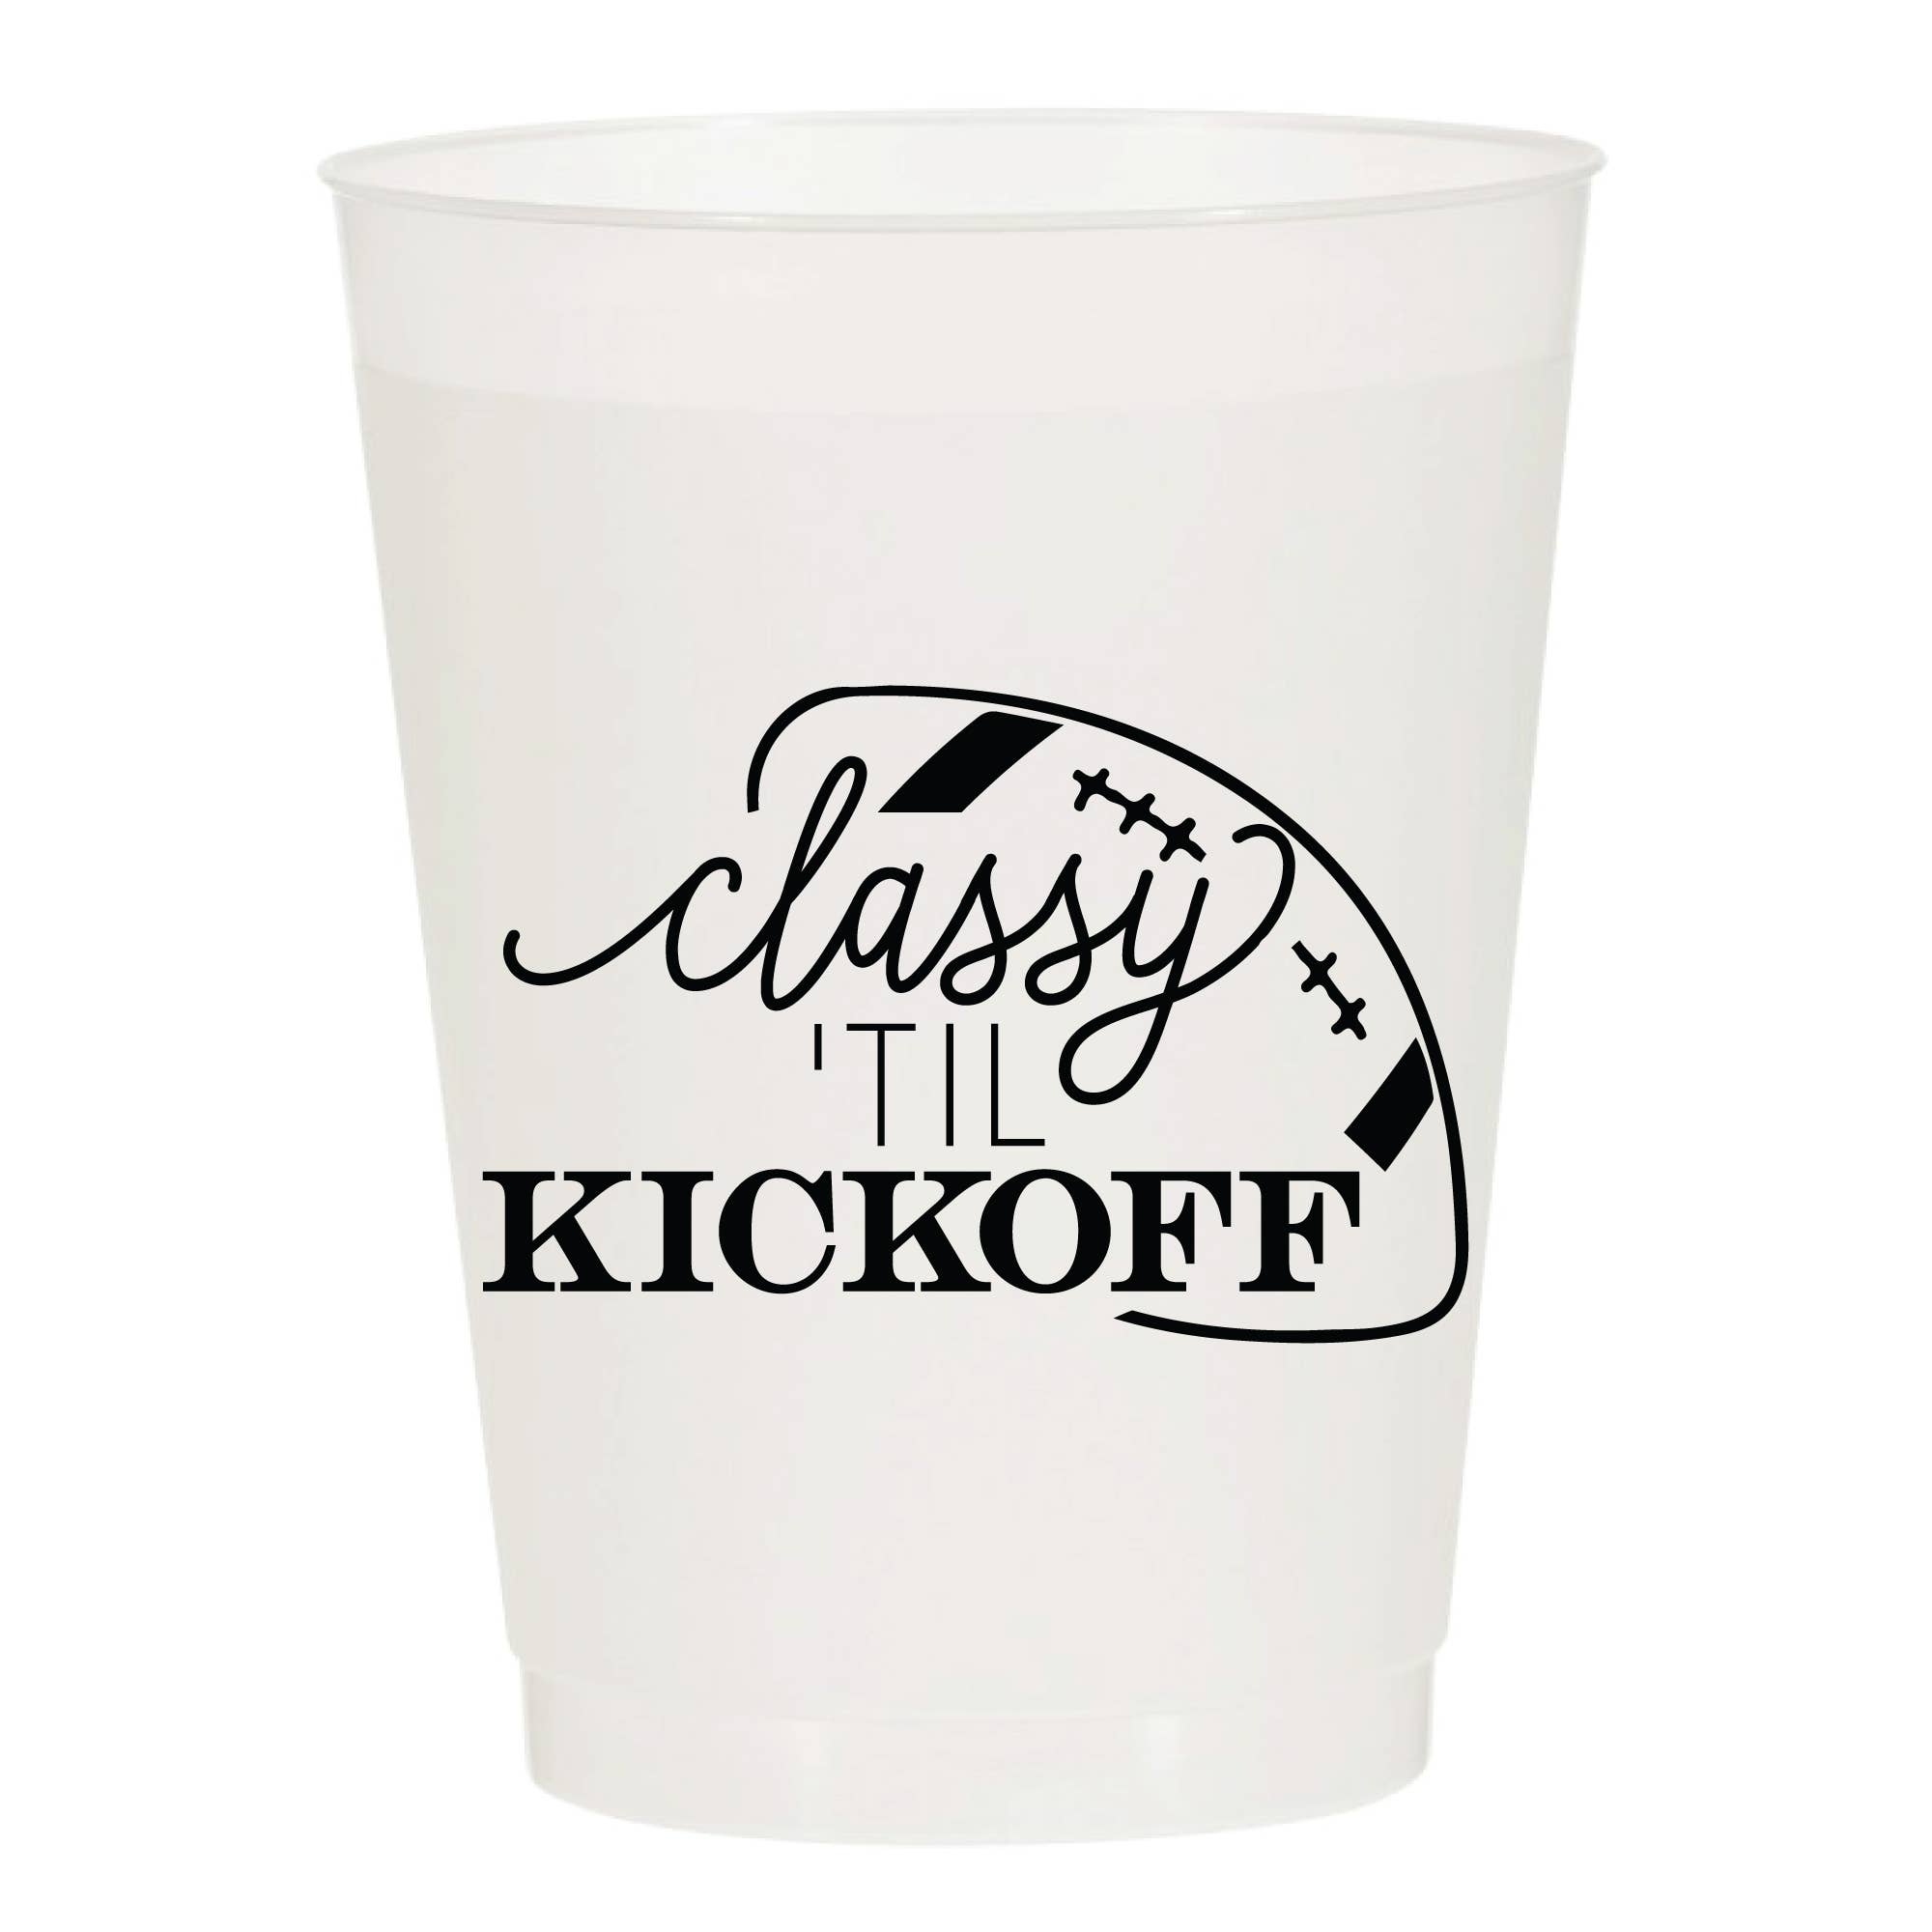 Classy Til Kickoff Football Tailgate Set of 10 Reusable Cups